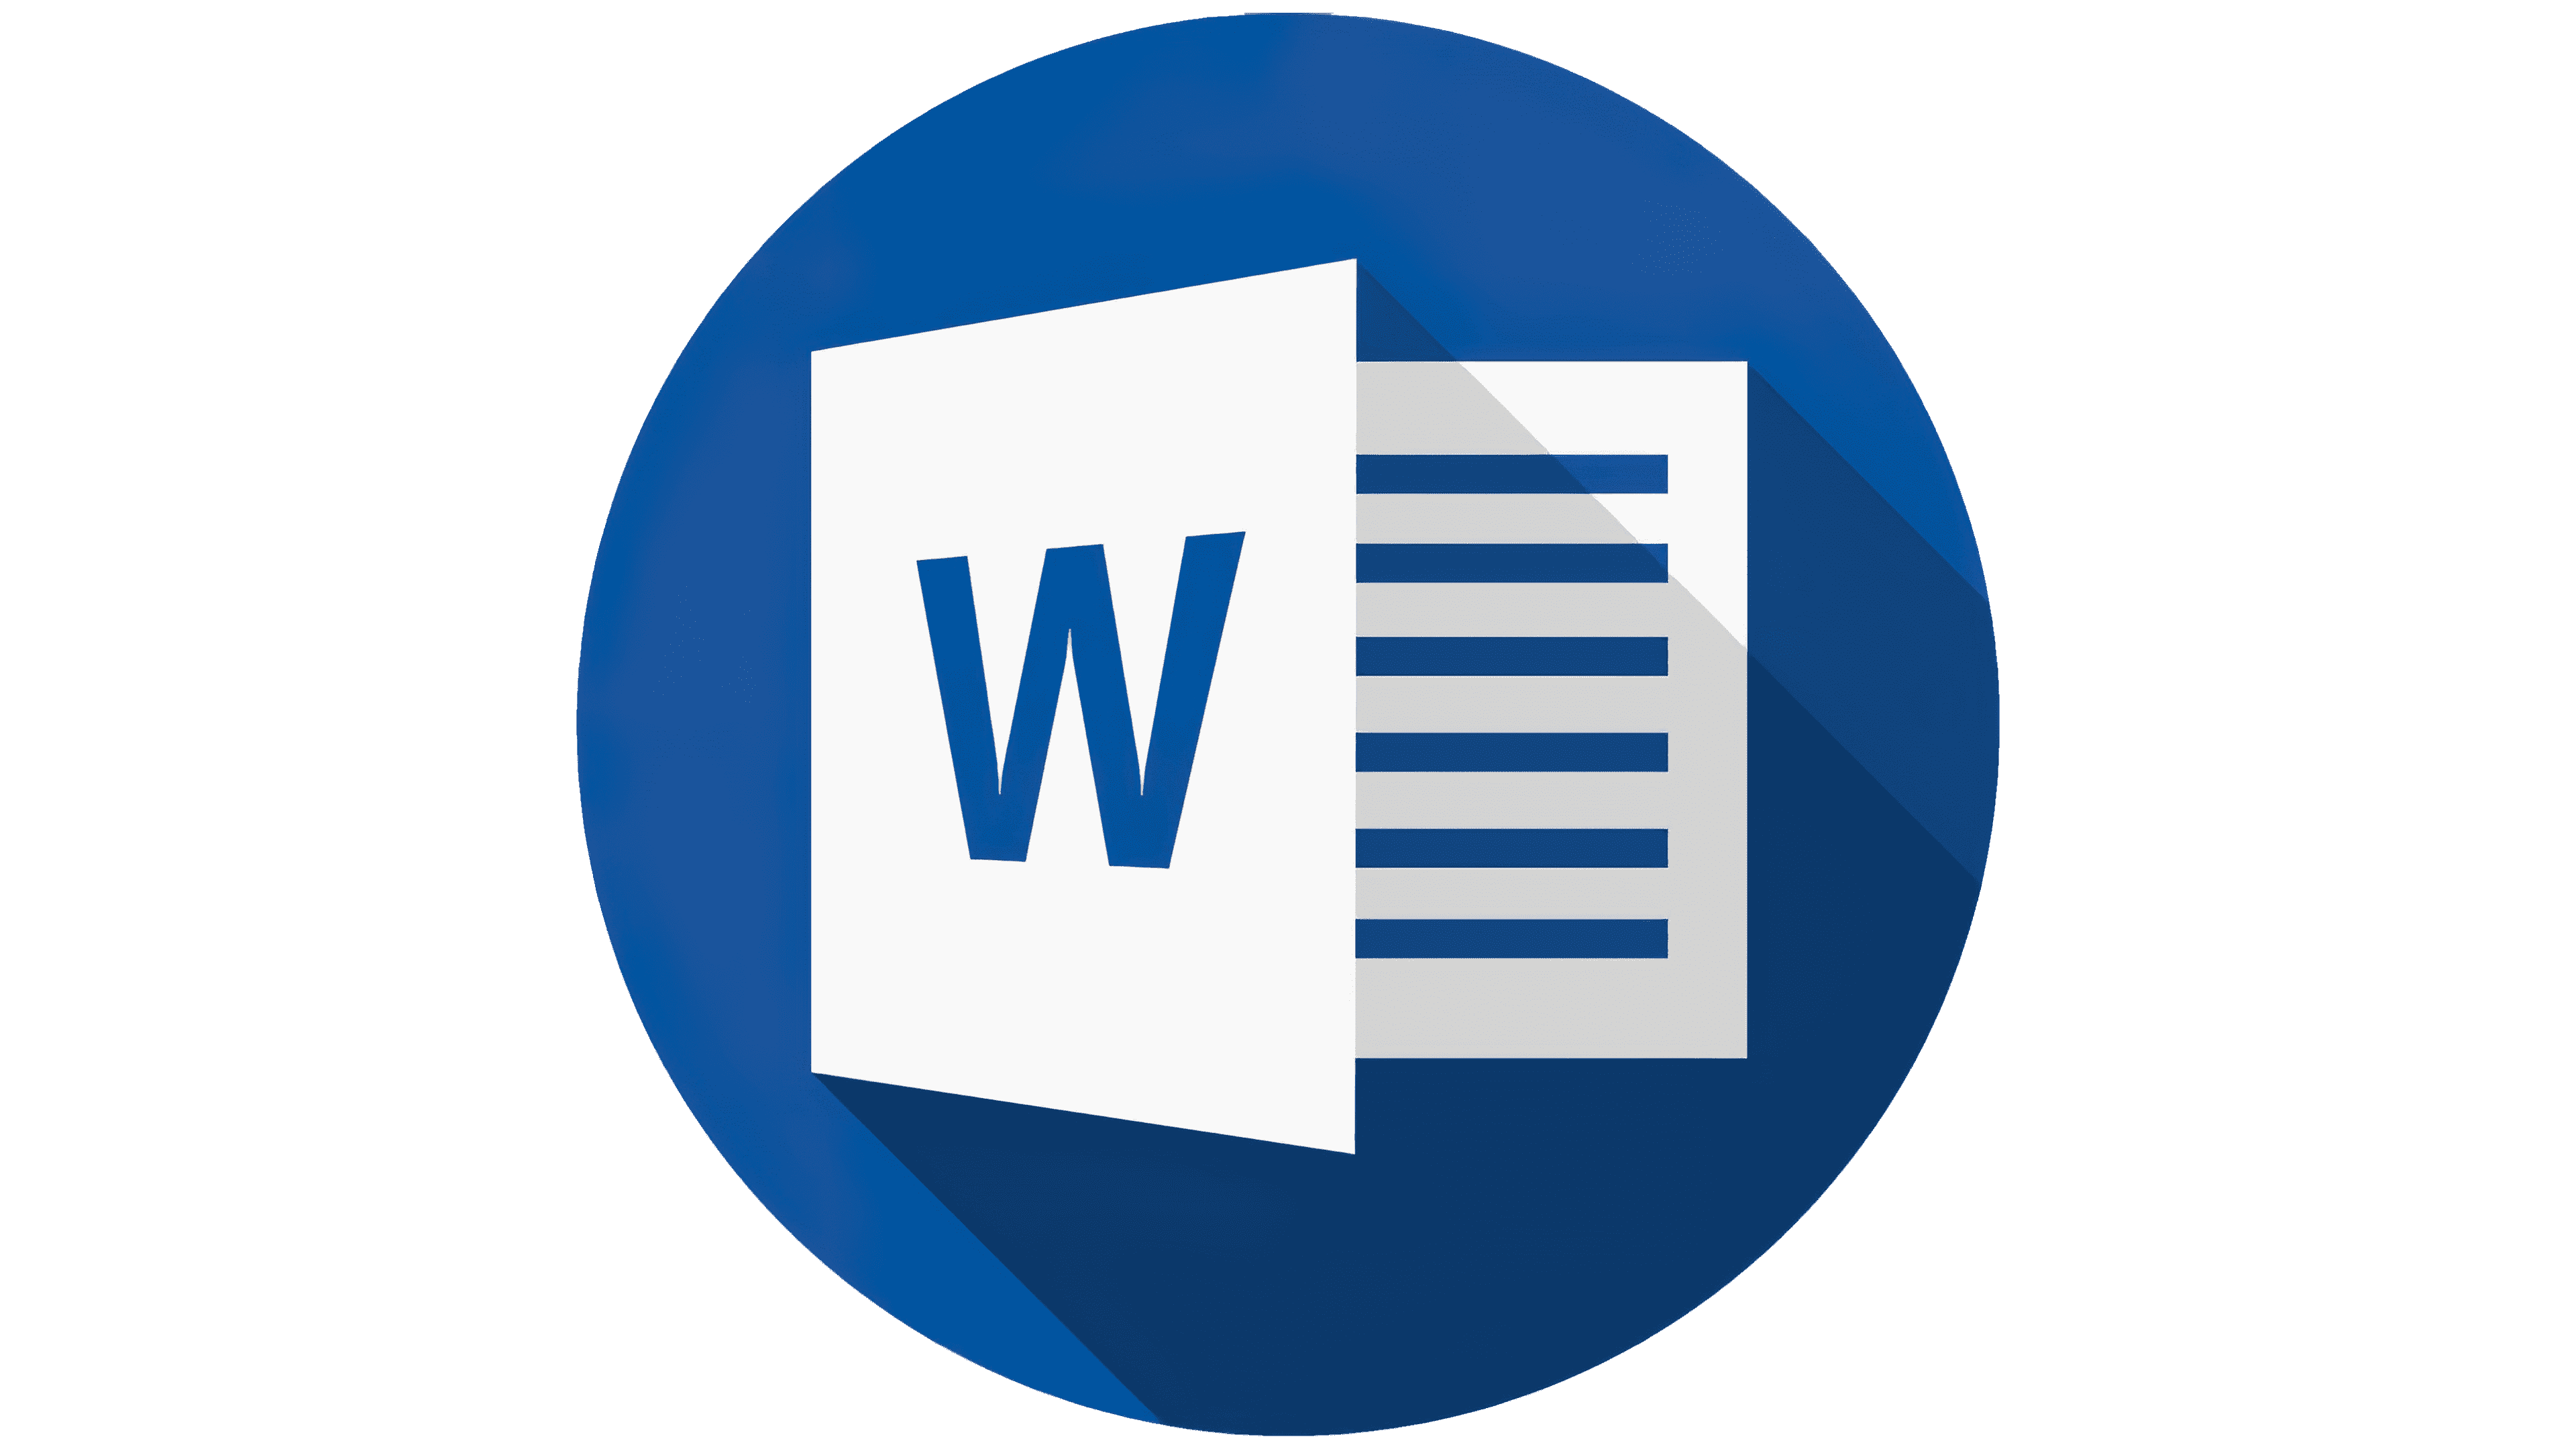 Microsoft Word Logo, symbol, meaning, history, PNG, brand